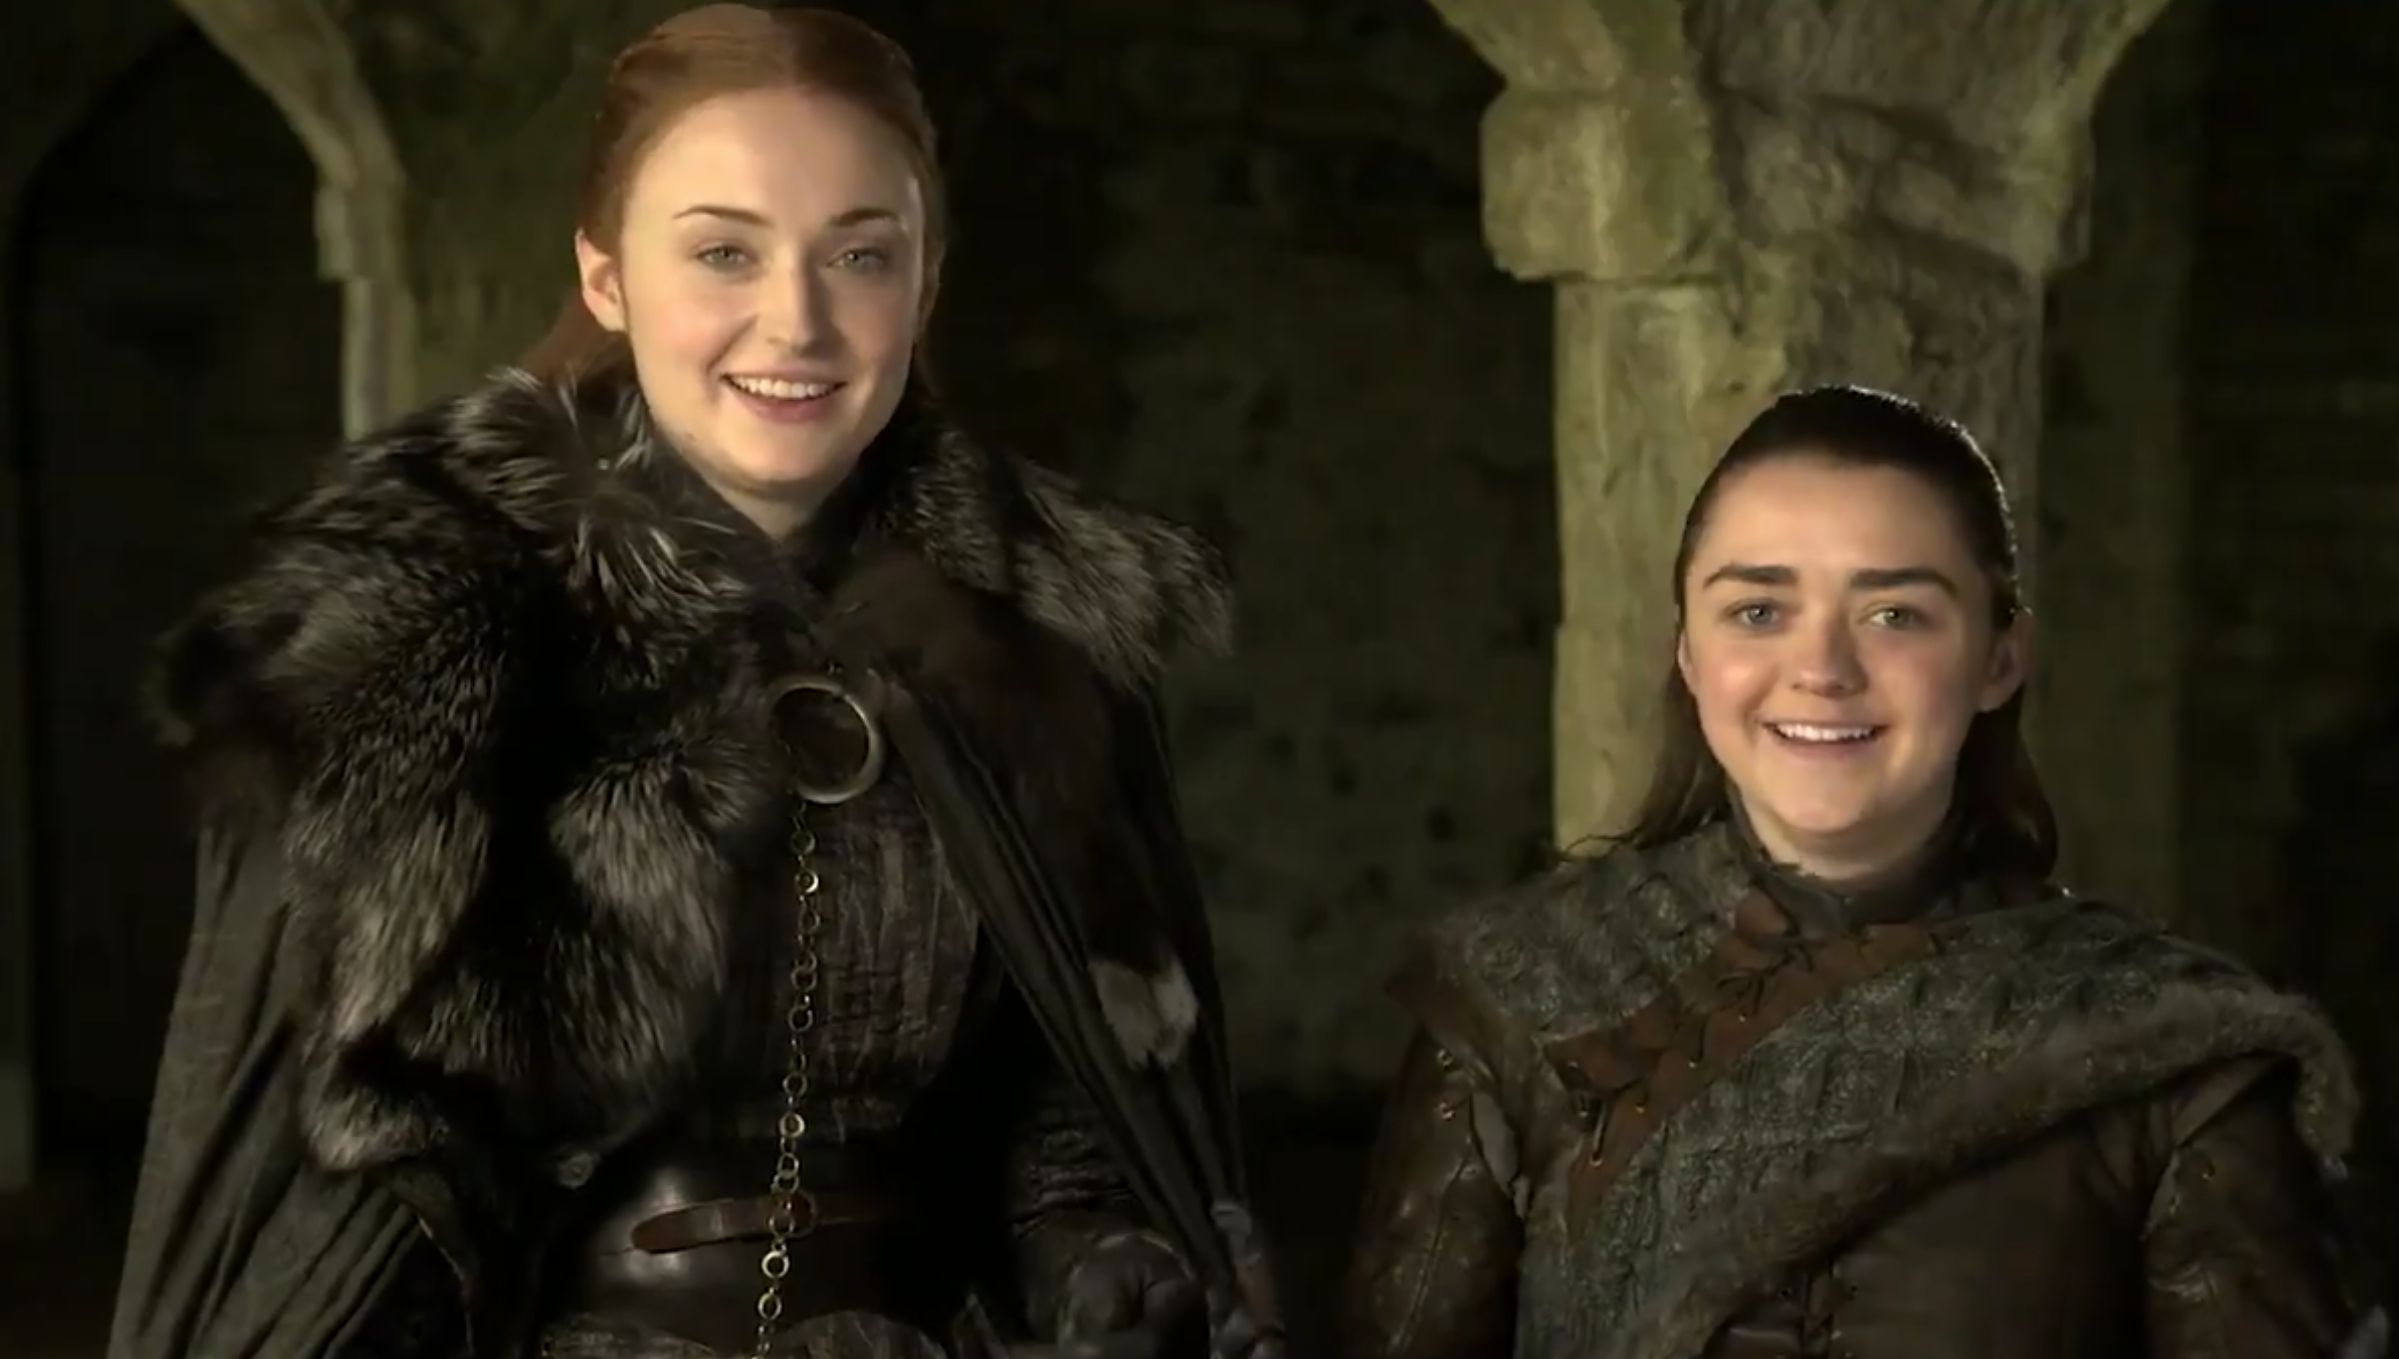 Sophie Turner and Maisie Williams Wore Matching Outfits to Kit